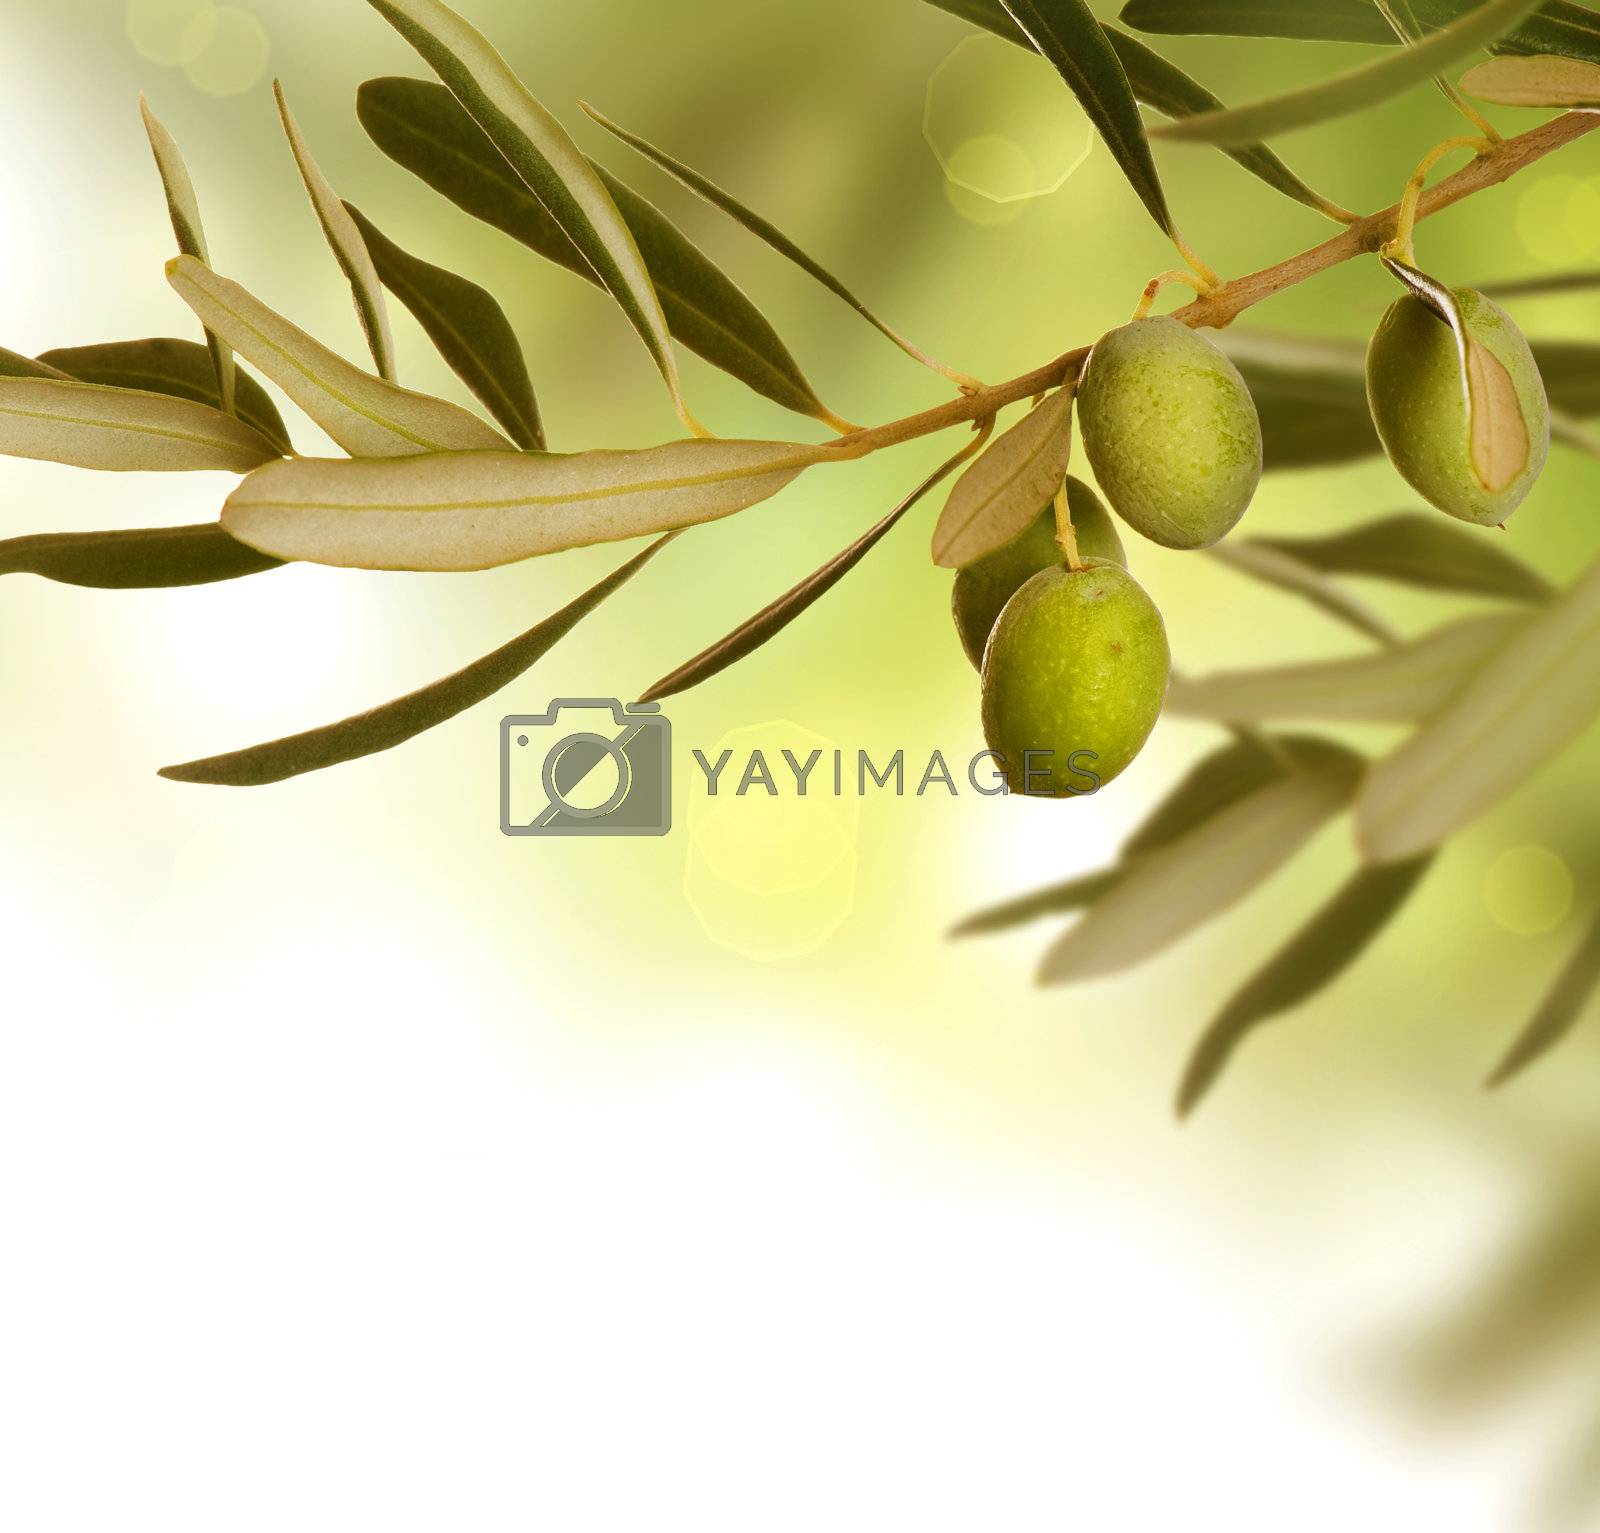 Royalty free image of Olives by SubbotinaA